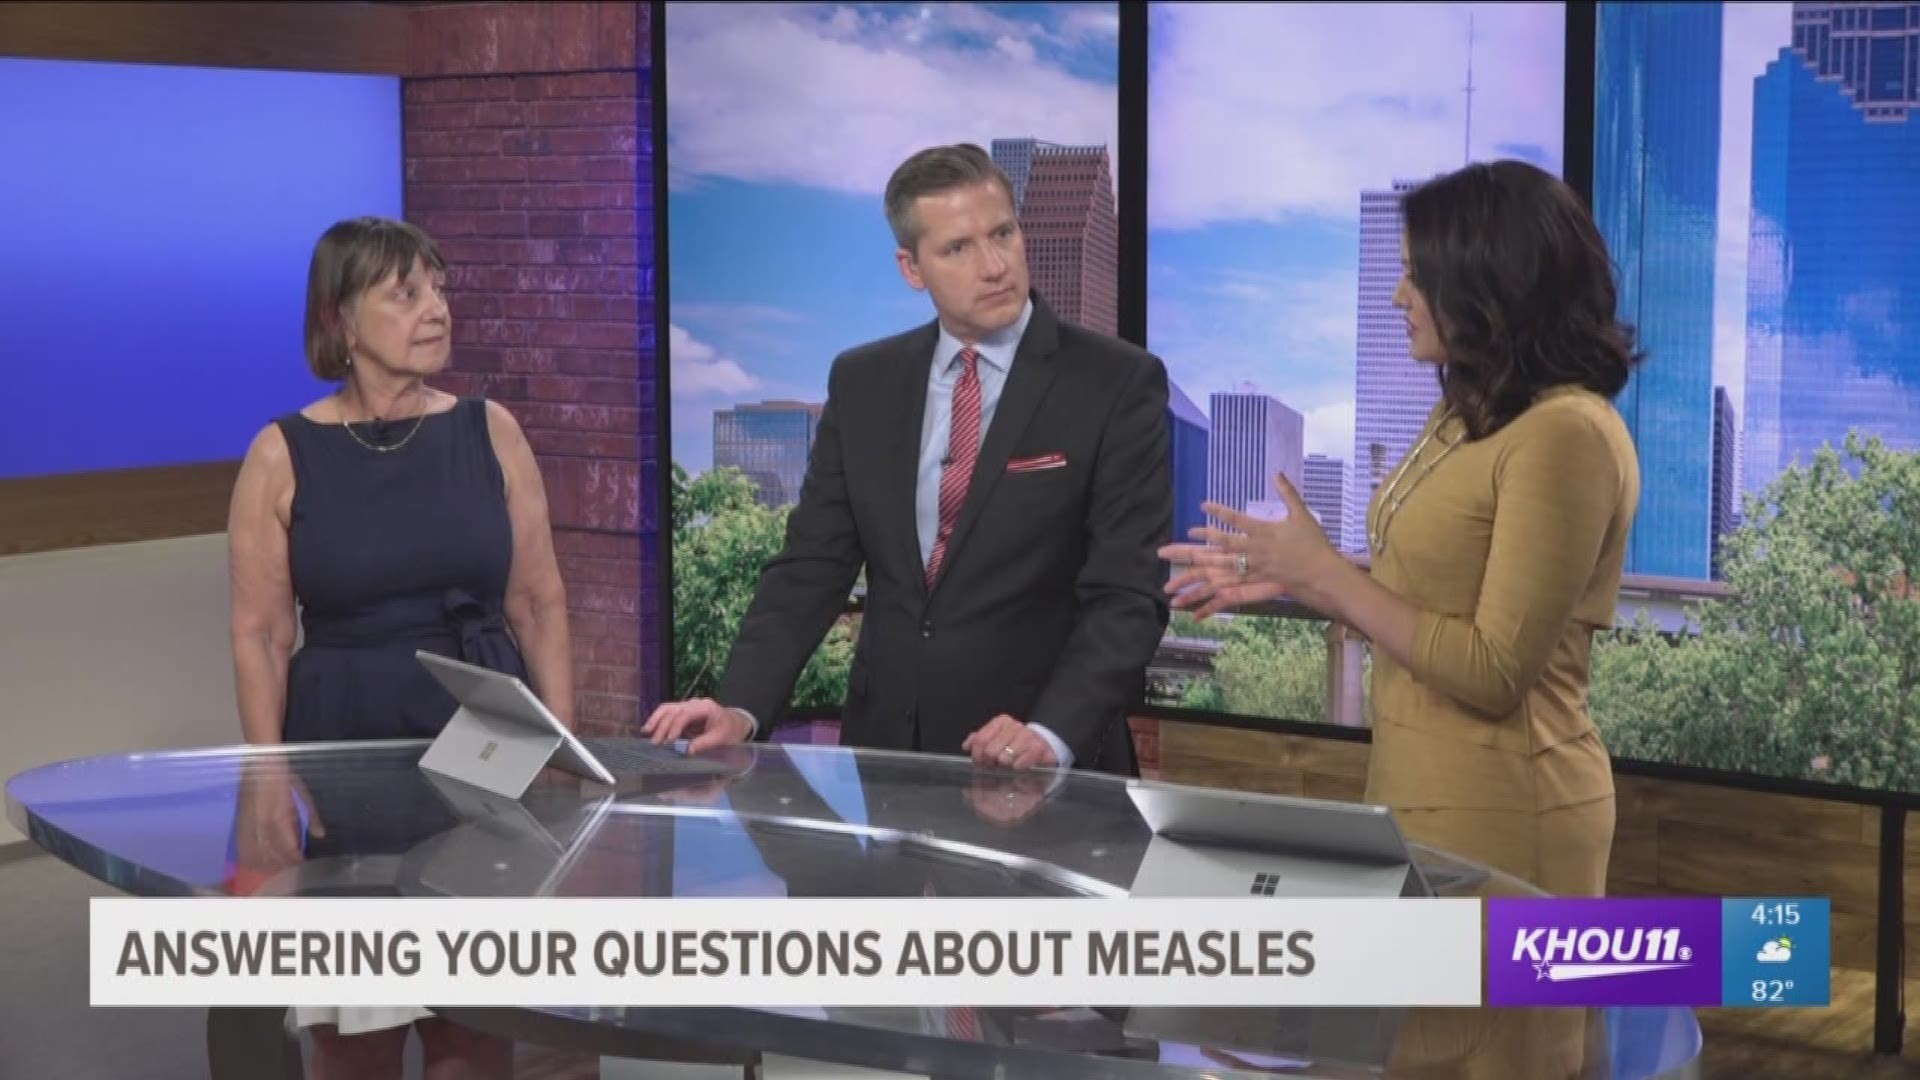 KHOU 11 anchors Rekha Muddaraj and Jason Bristol speak with Dr Catherine Troisi, an epidemiologist, about the measles virus and common questions parents and others may have.